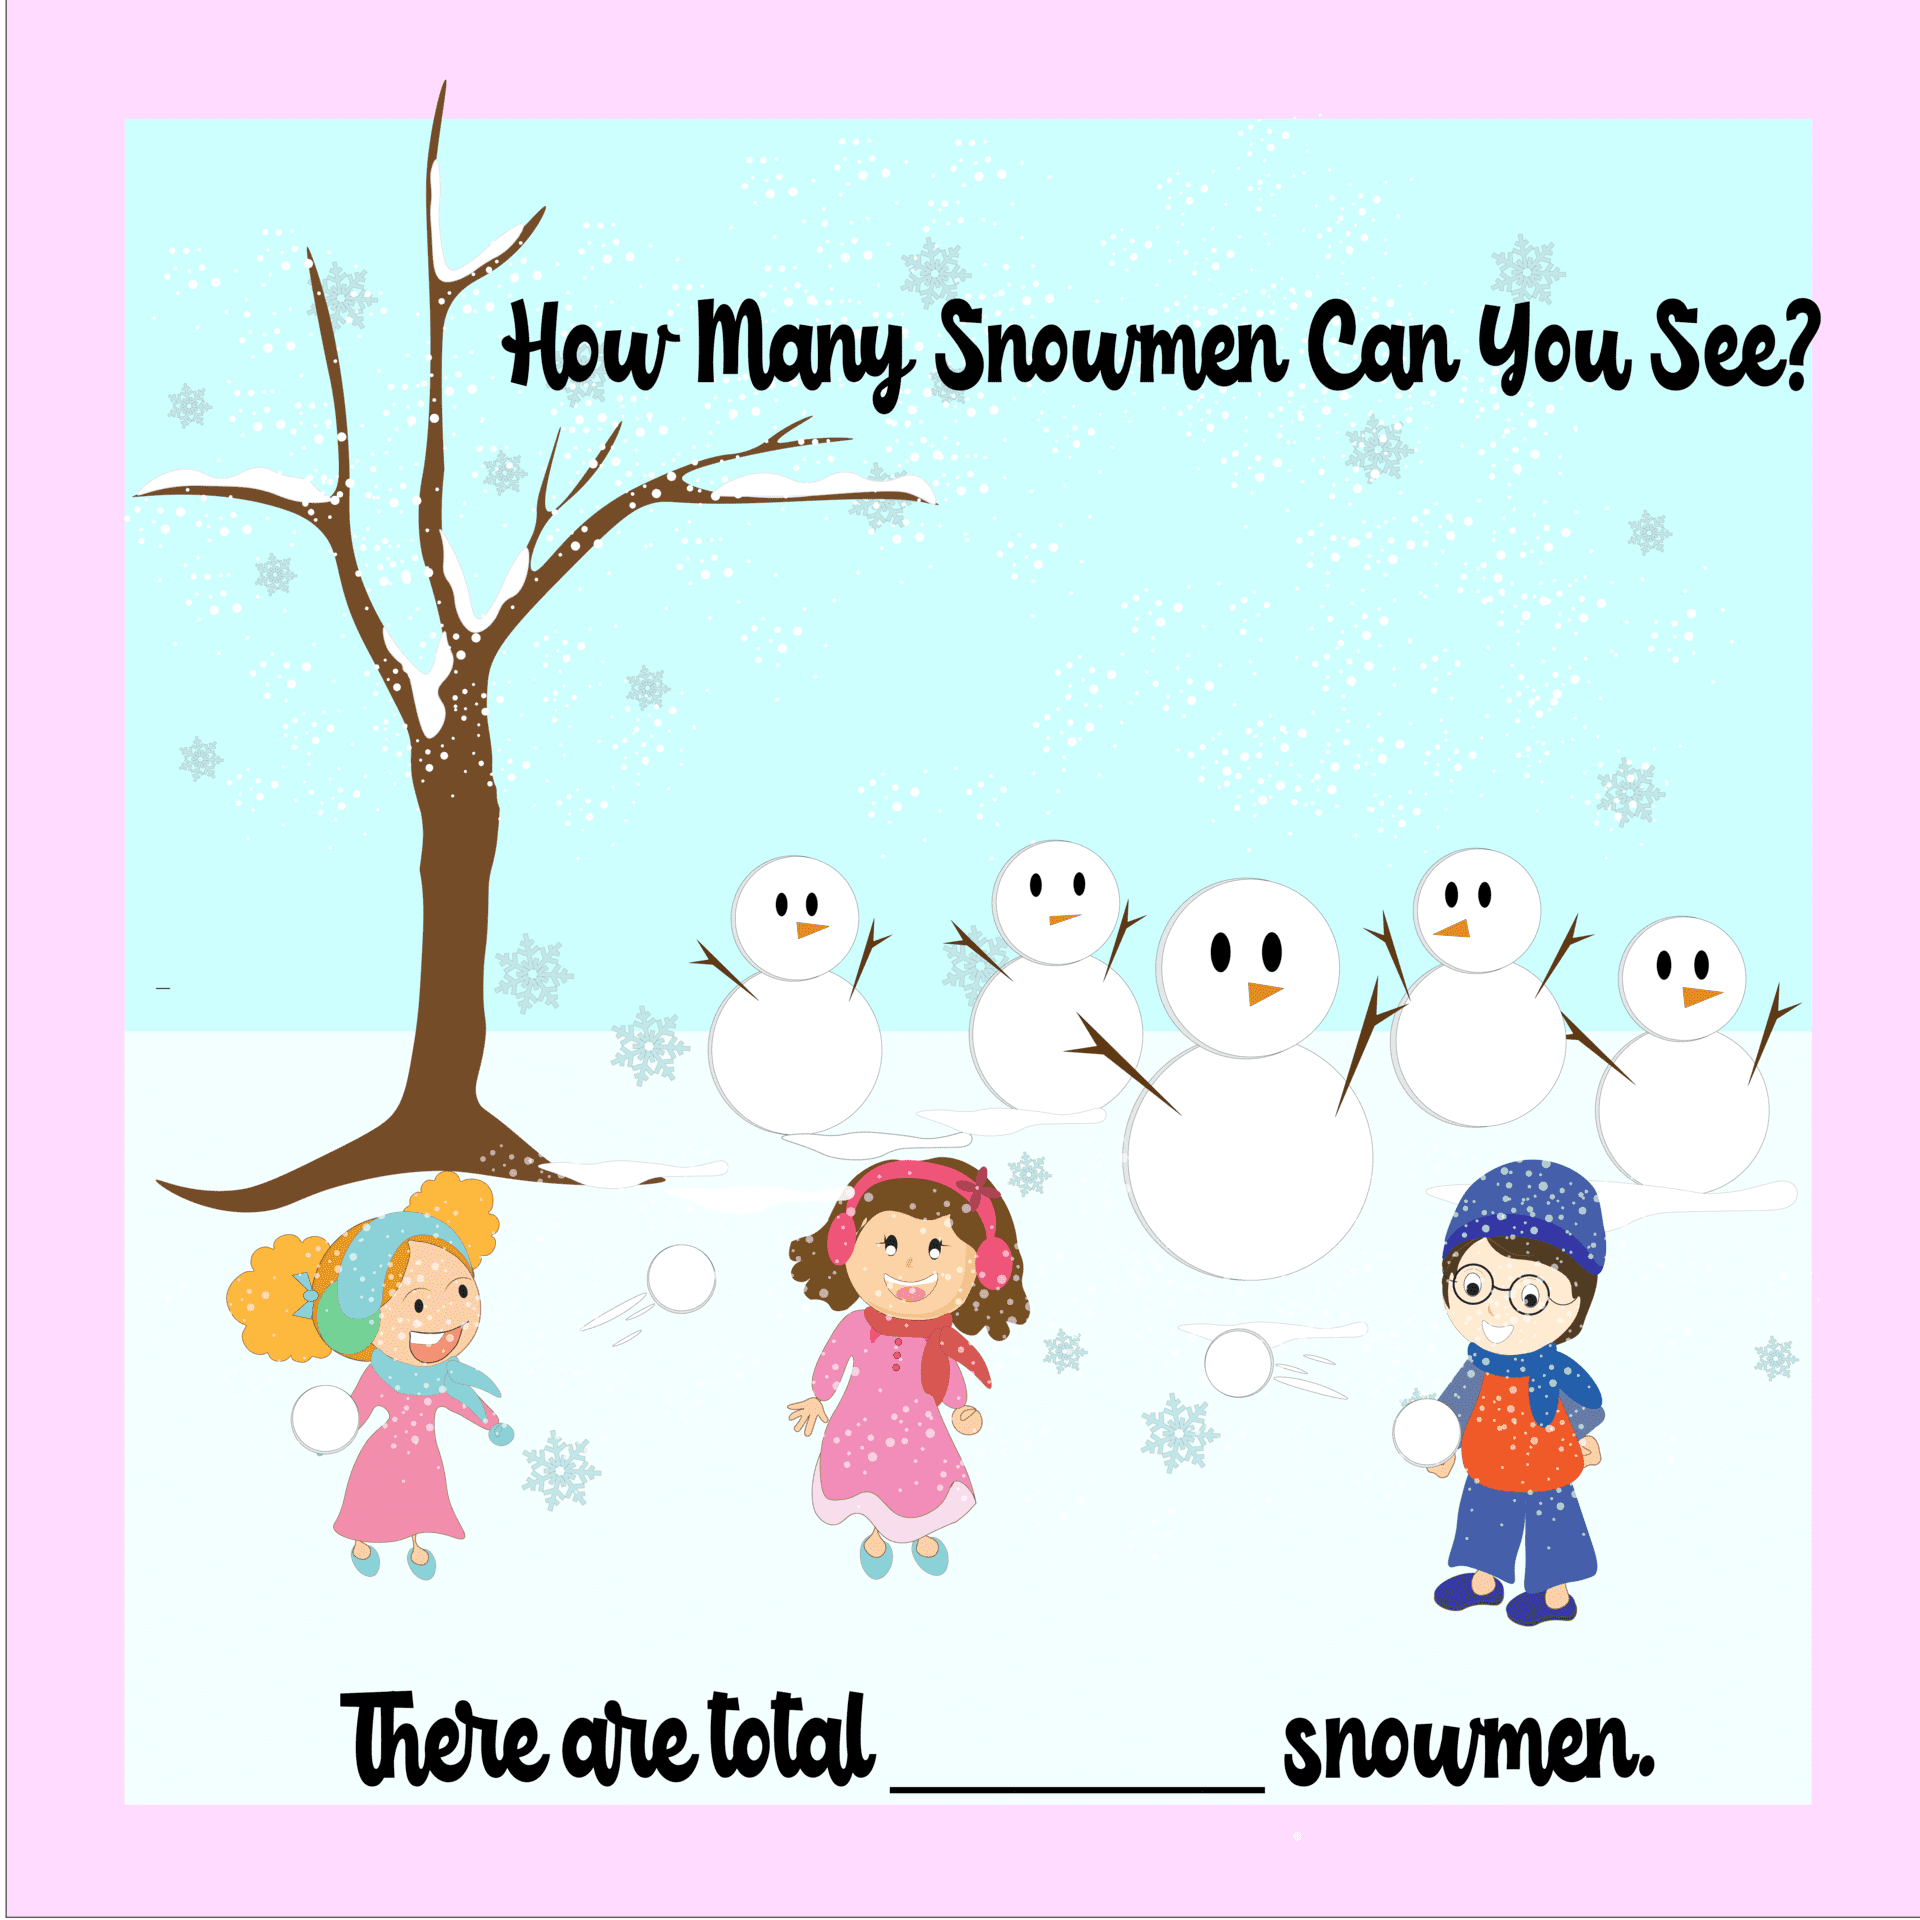 Counting Snowman to Find the Correct Snowman Number